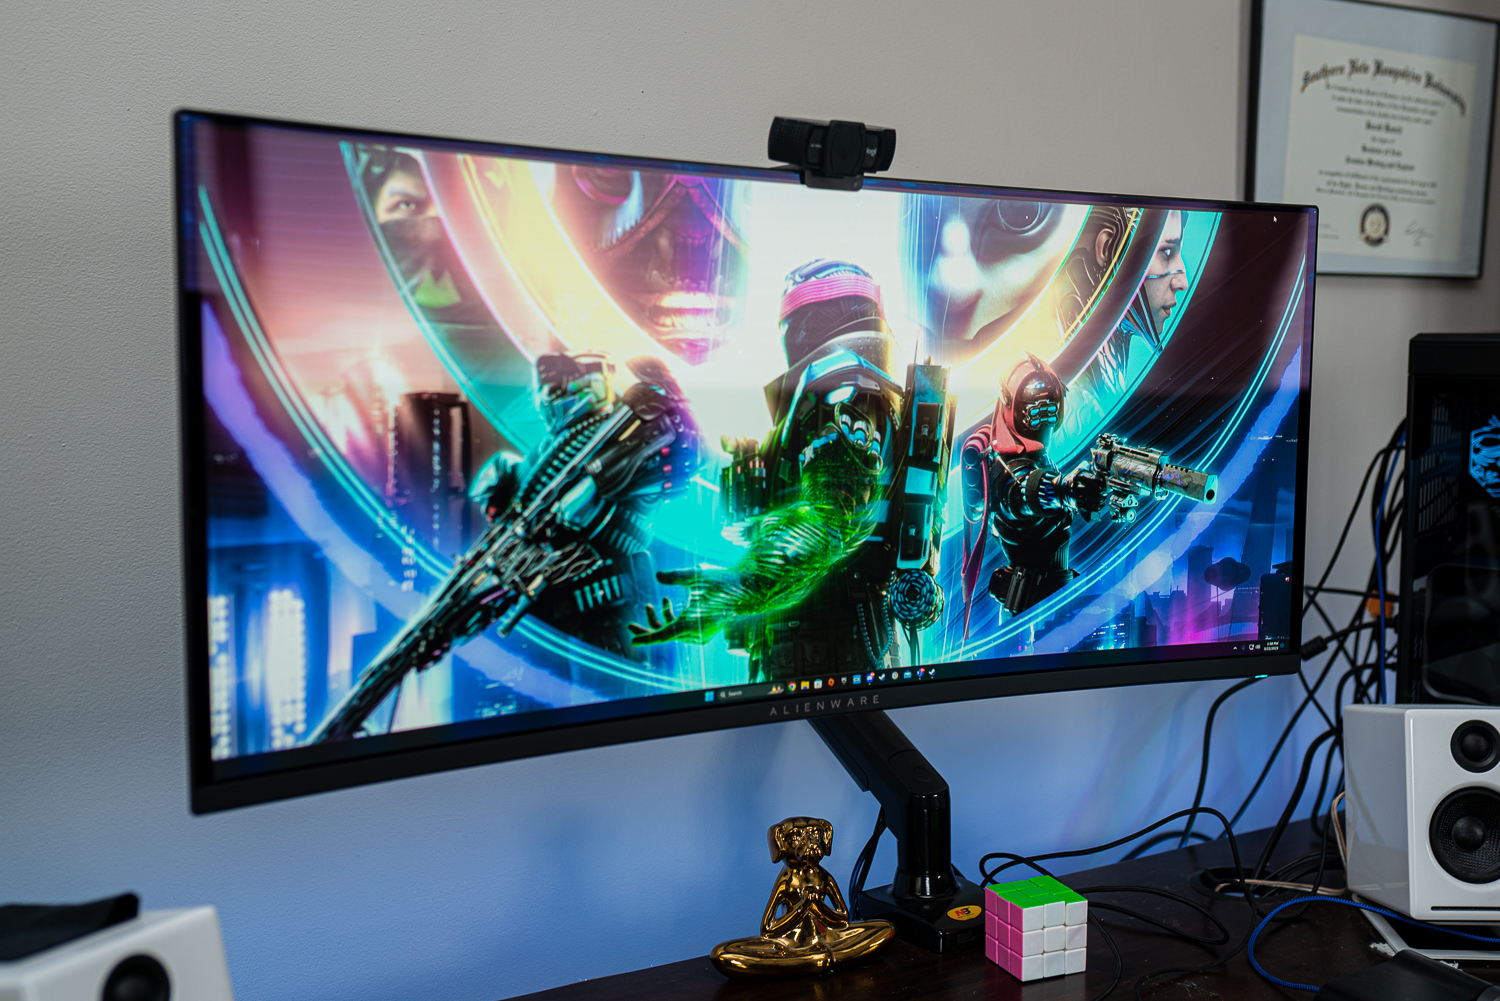 TV versus Monitor: The pros and cons of using each with your Mac